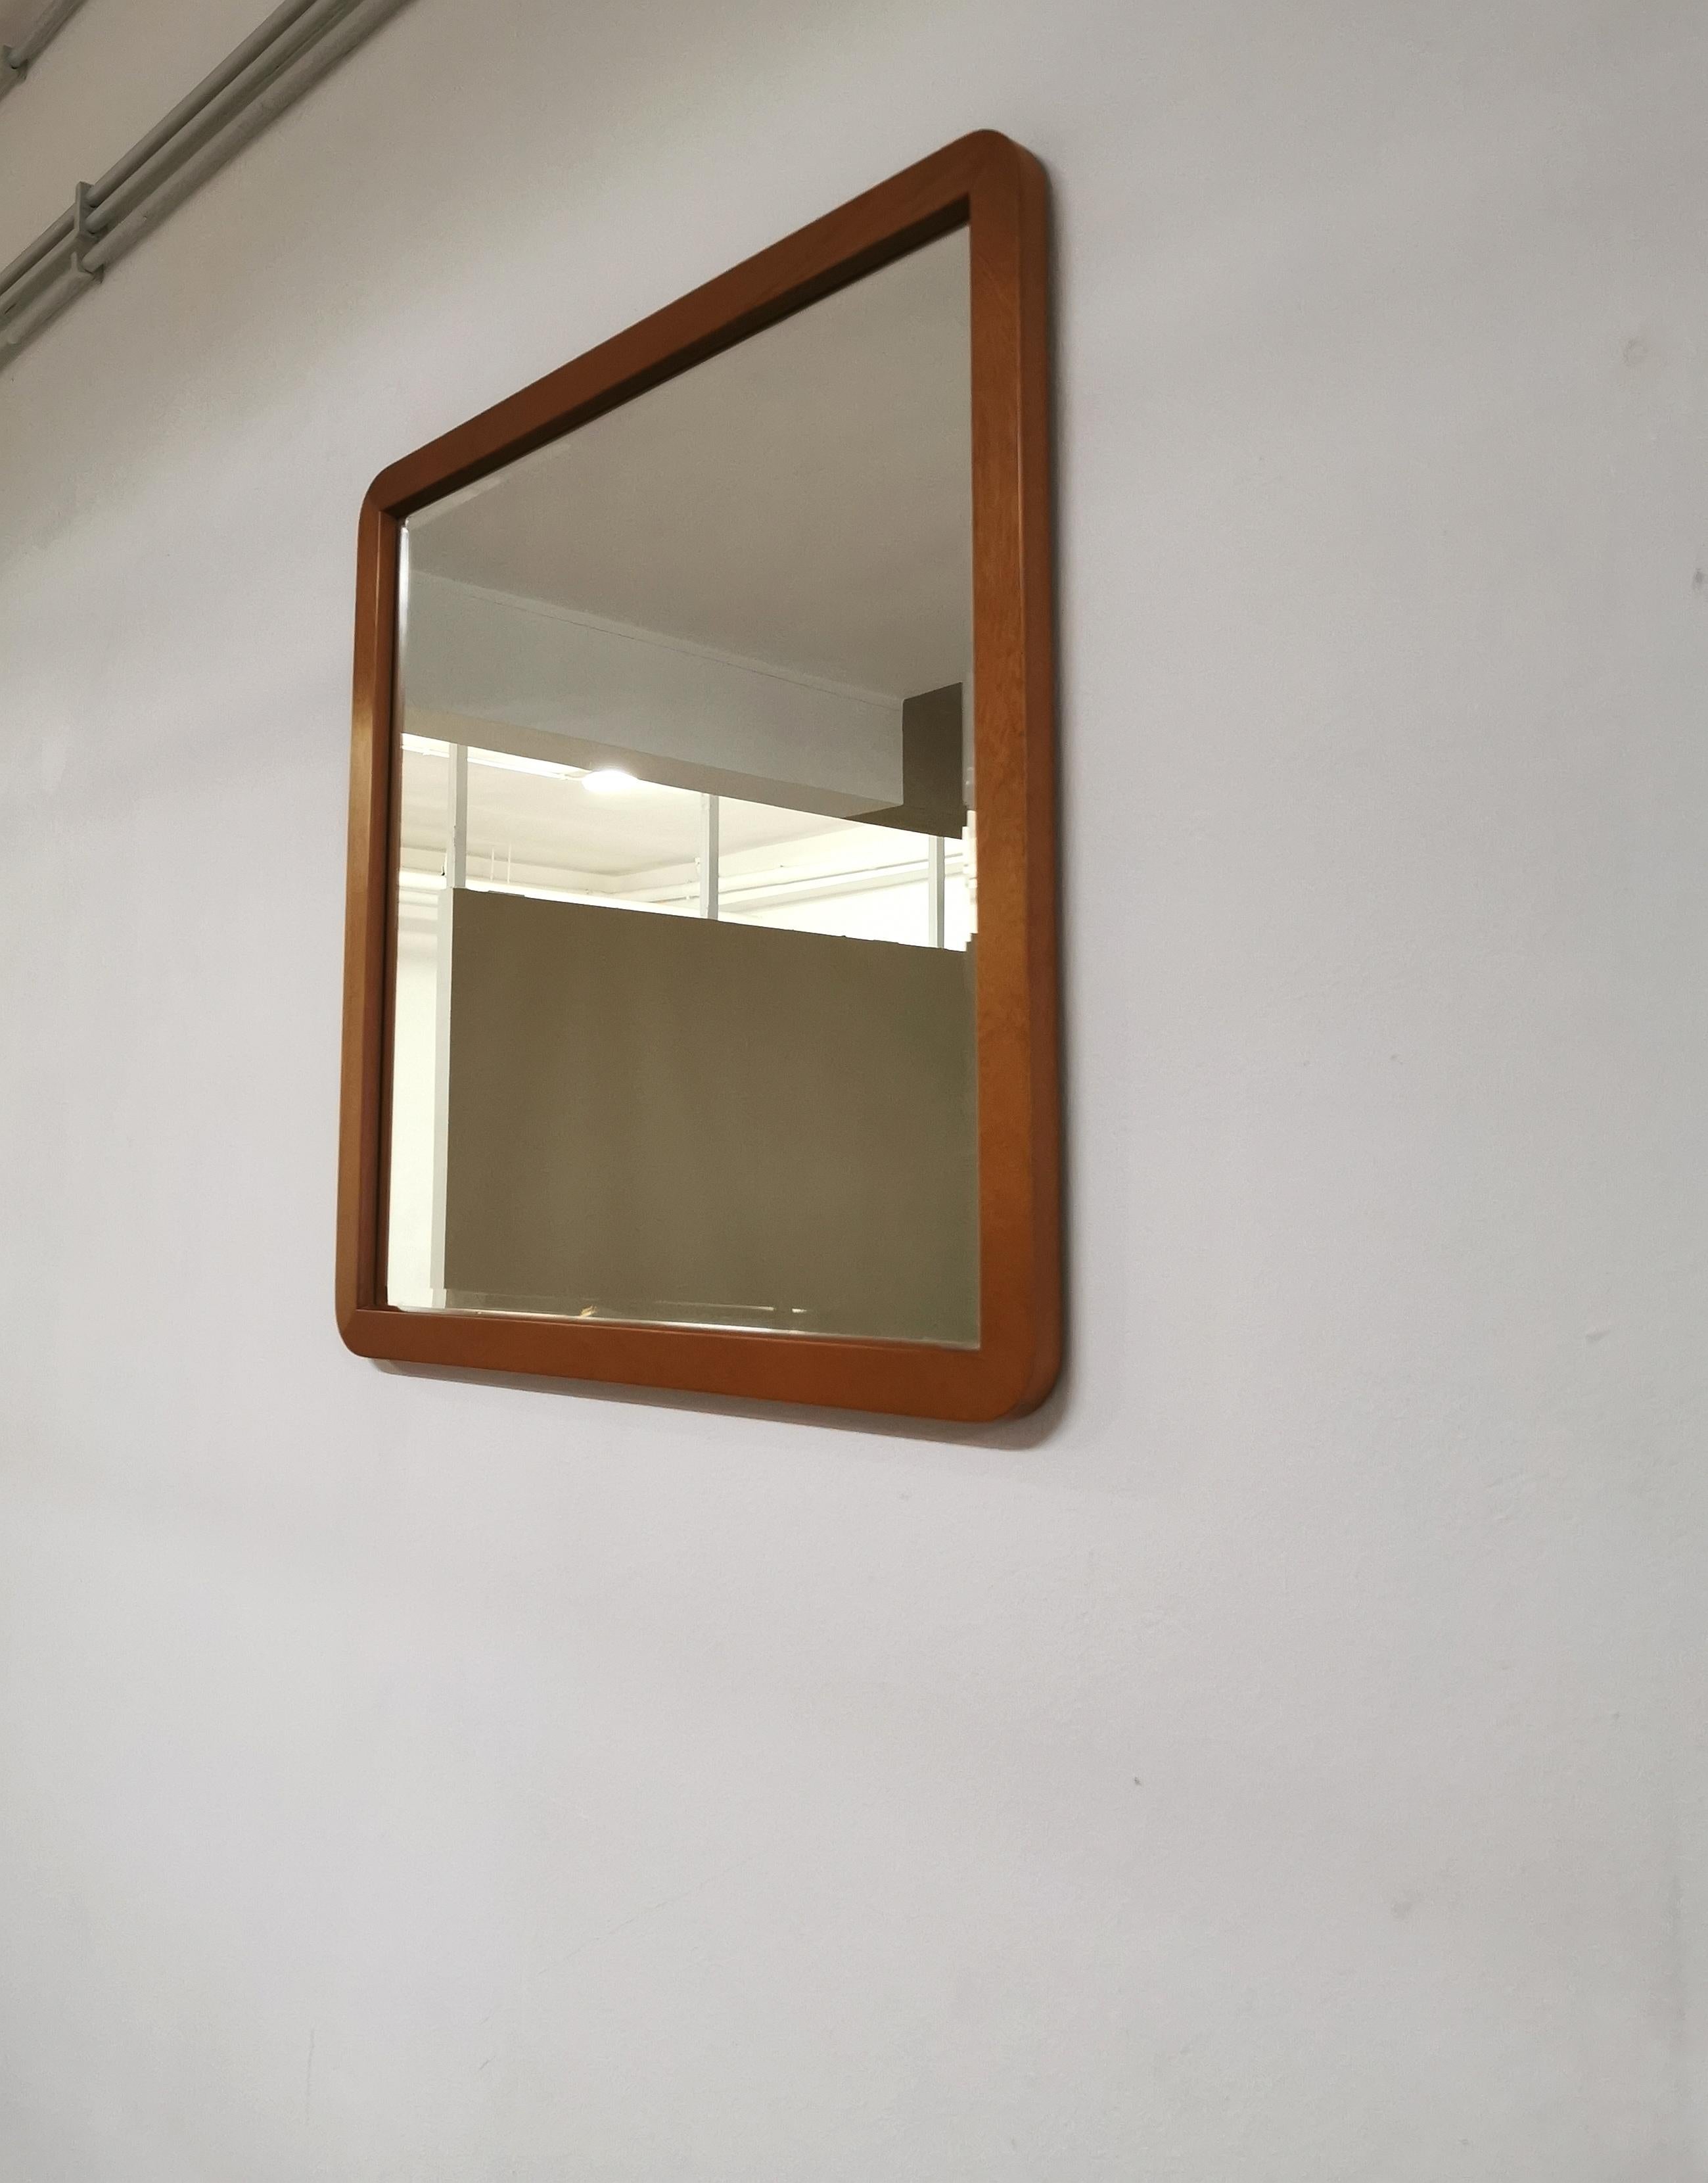 Wall Mirror Cherry Wood Frosted Glass Calligaris Square Modern Italy 1990s In Good Condition For Sale In Palermo, IT